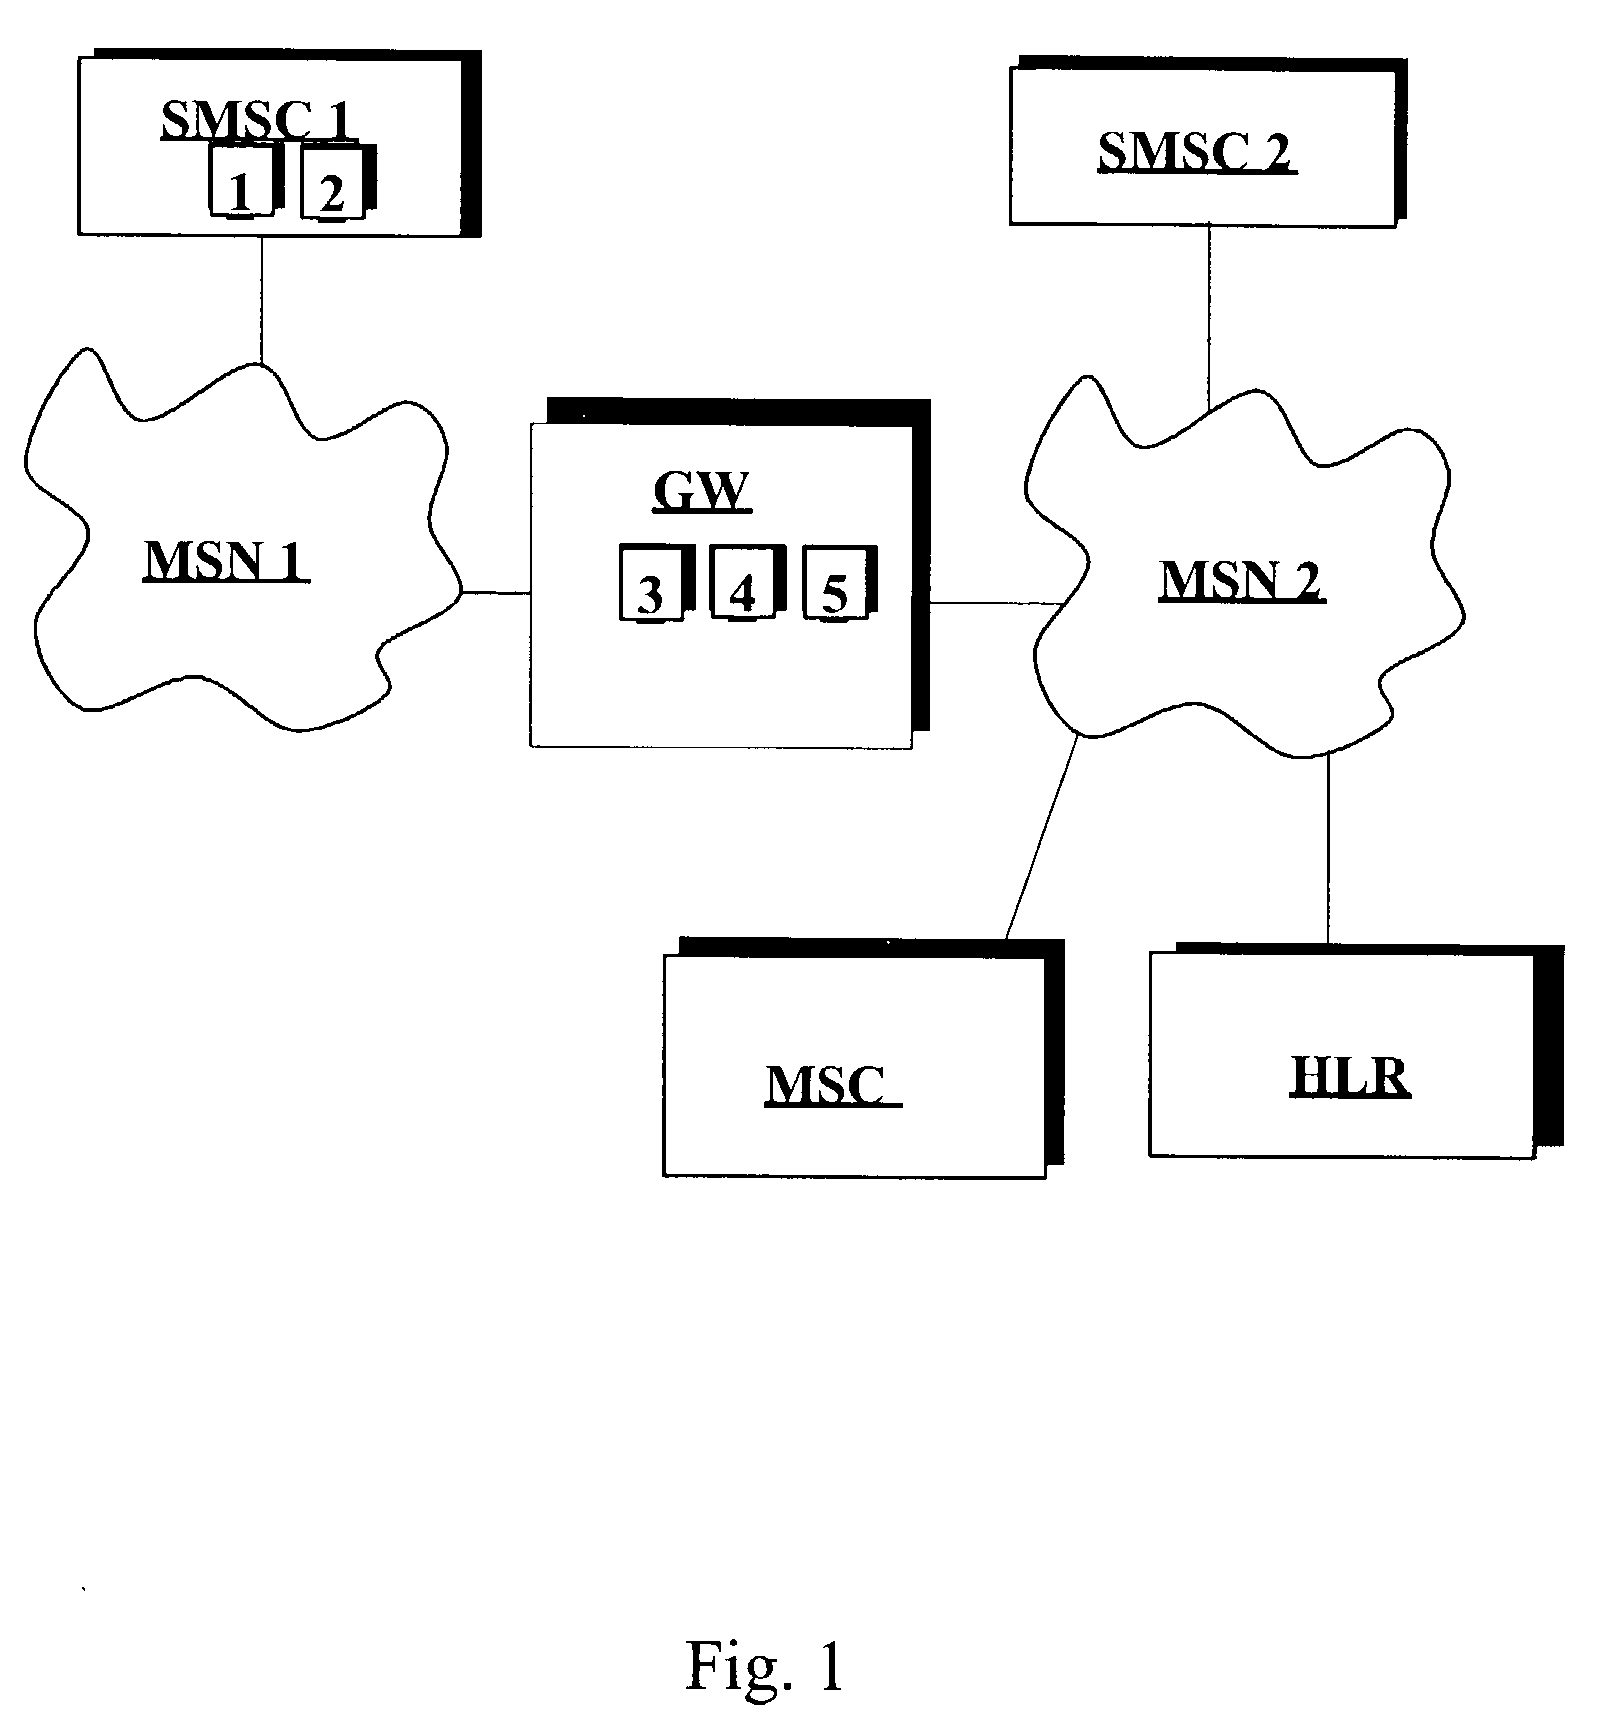 Method and system for routing of short messages in a telecommunication system